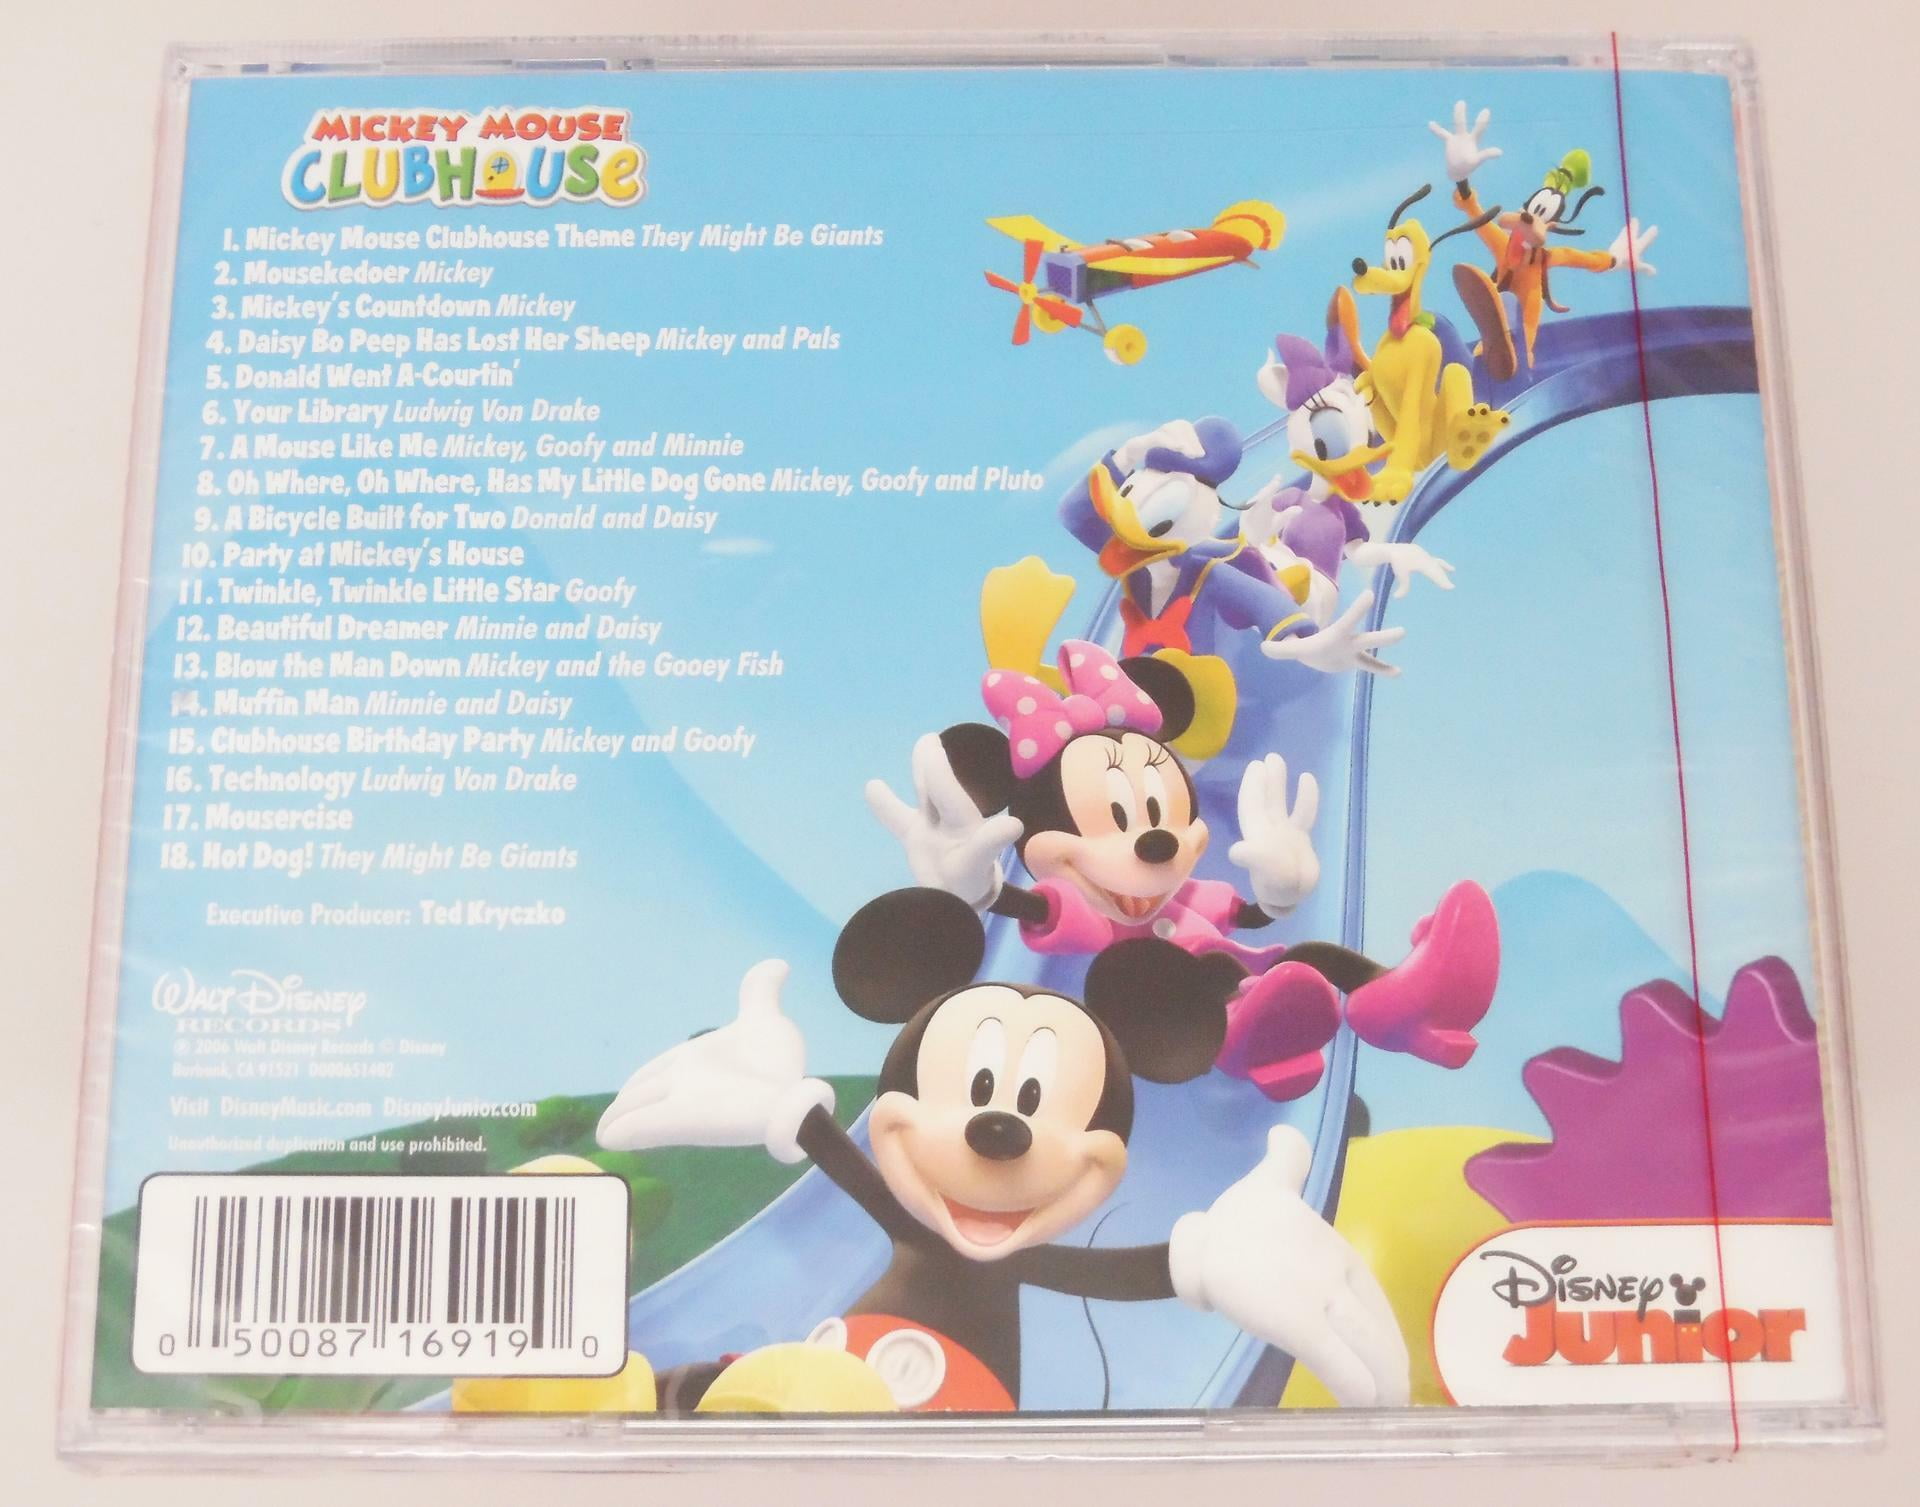 Disney, Media, 4 Disney Mickey Mouse Clubhouse Dvds